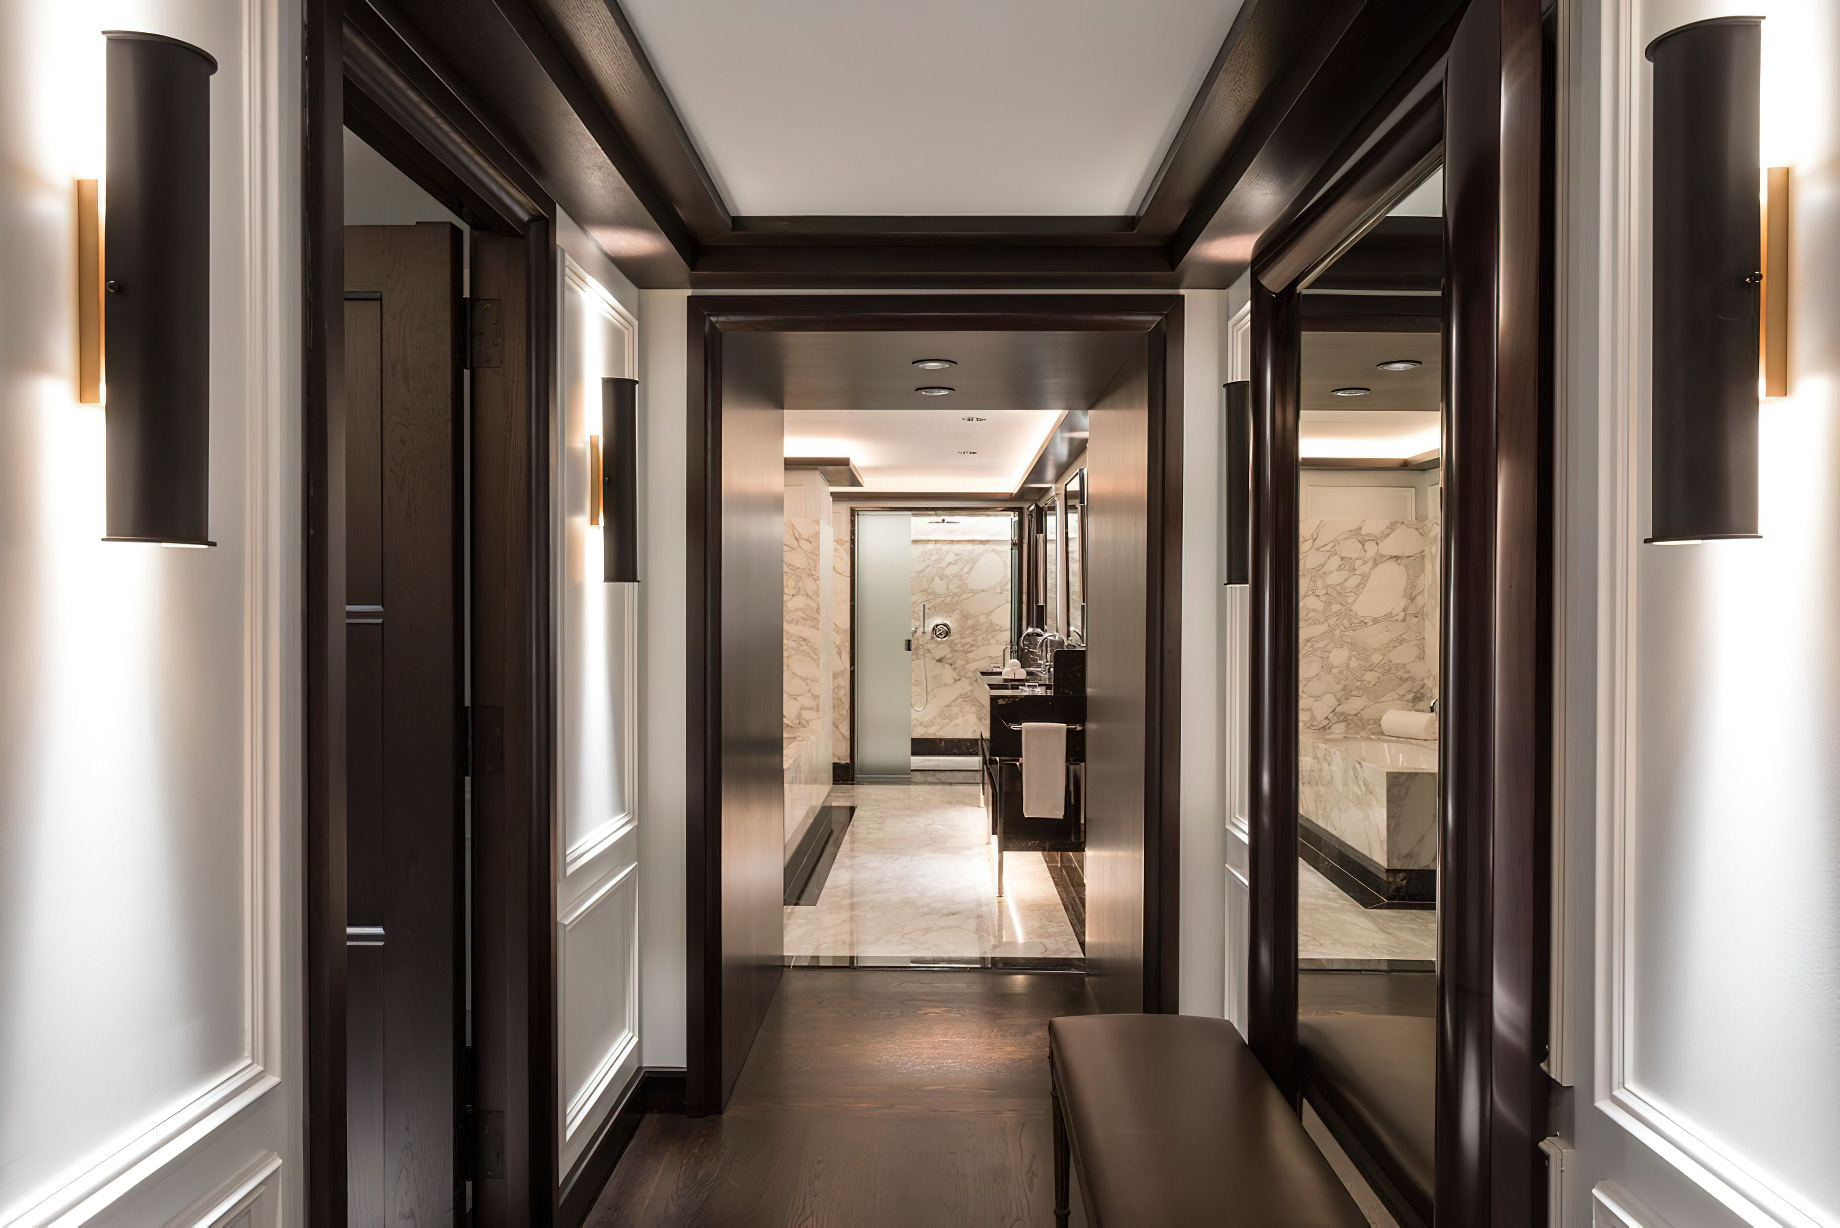 The Ritz-Carlton New York, Central Park Hotel – New York, NY, USA – The Presidential Suite Master Bathroom Walk-in Closet